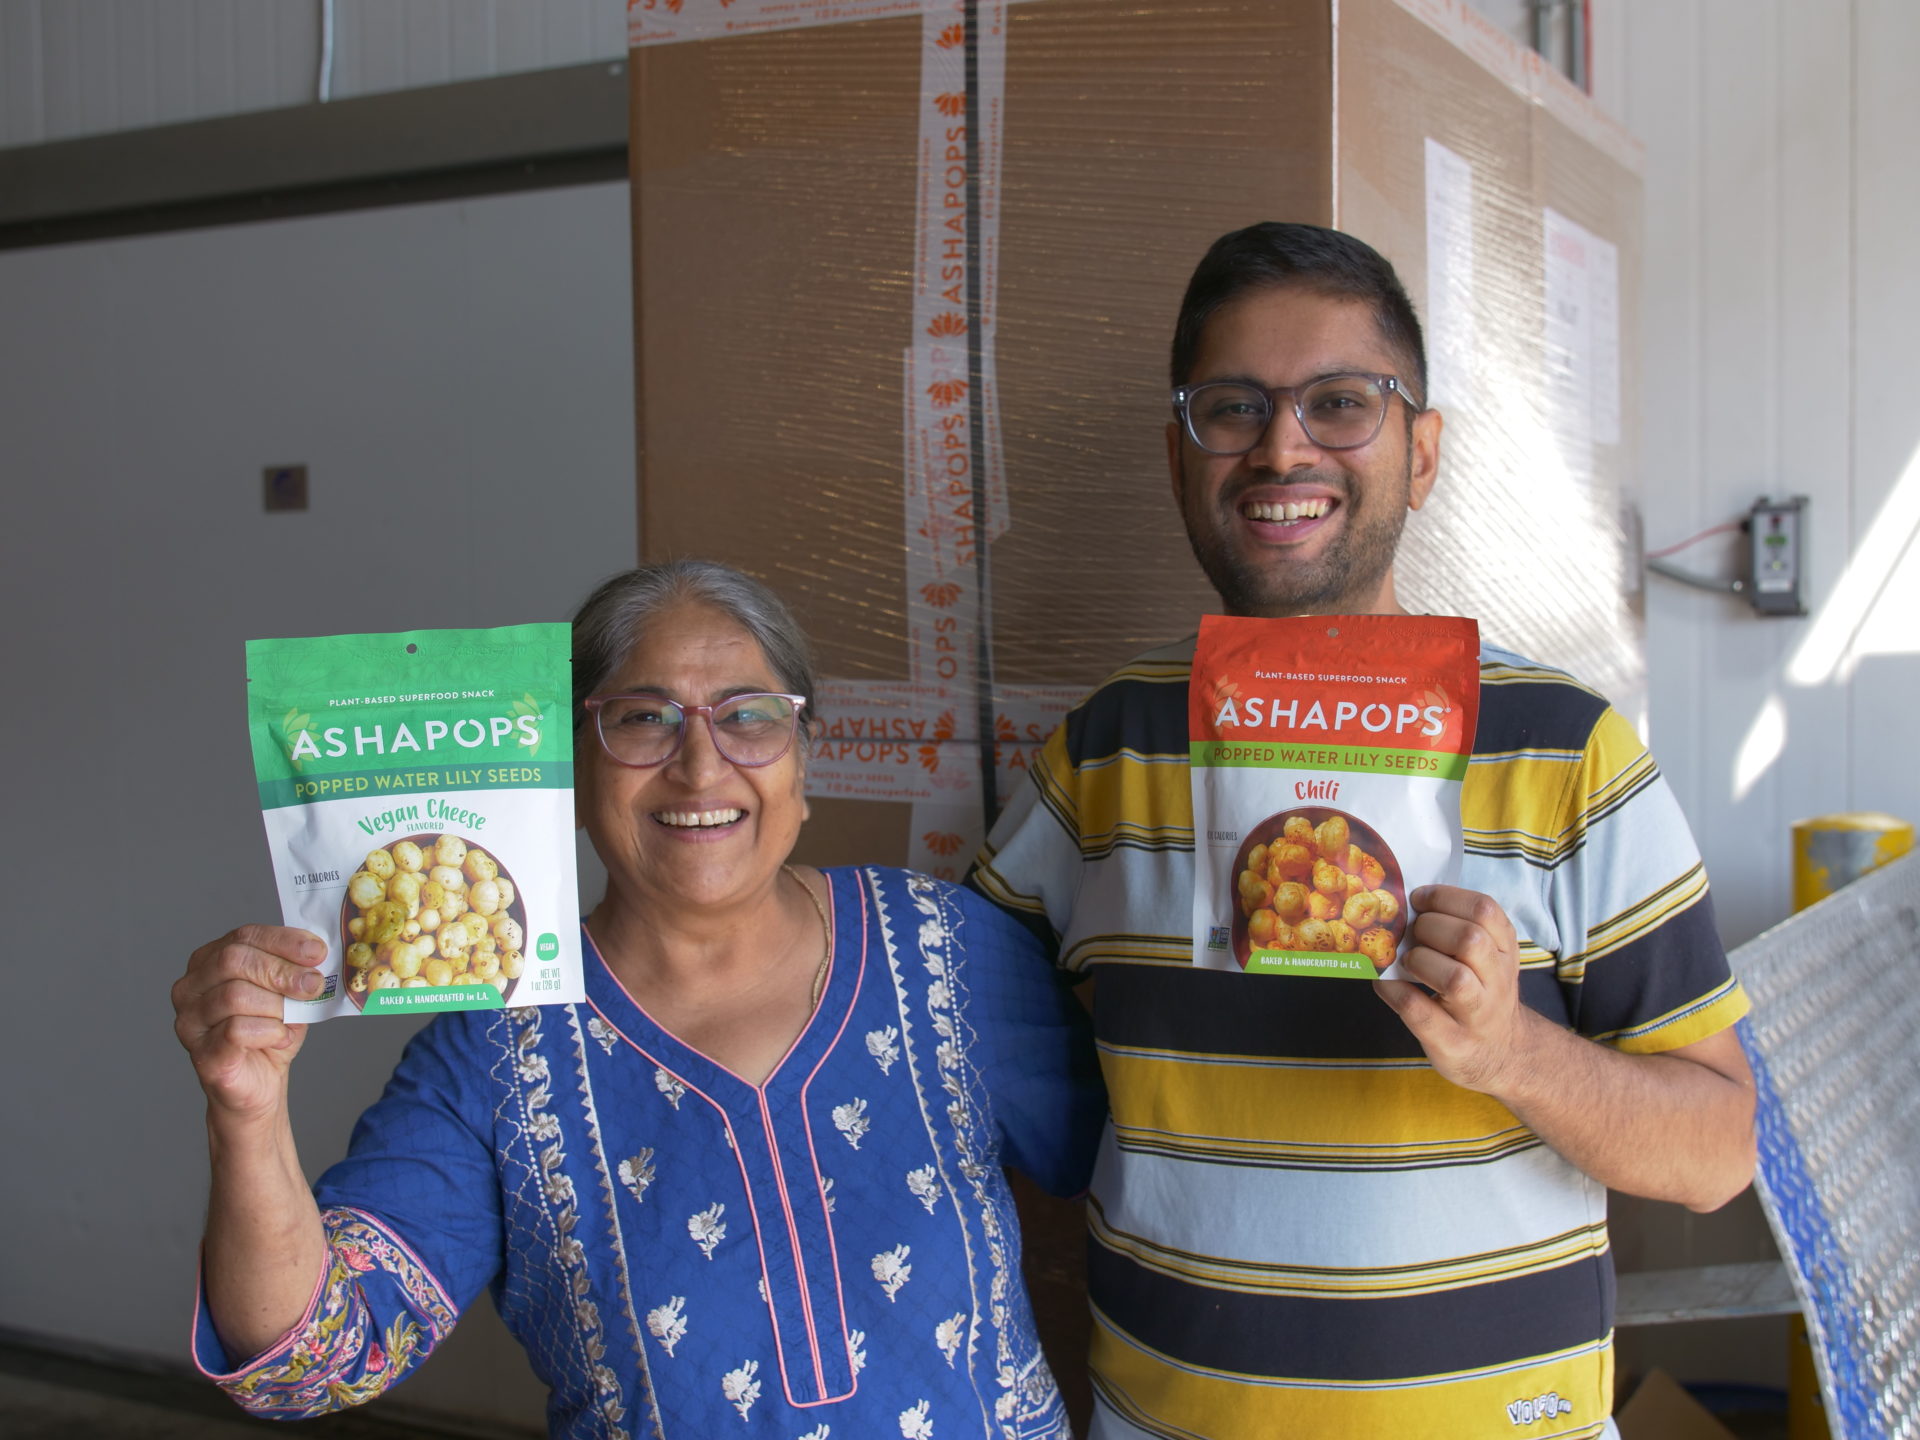 Founders, Jai and Asha, posing with their food product, 